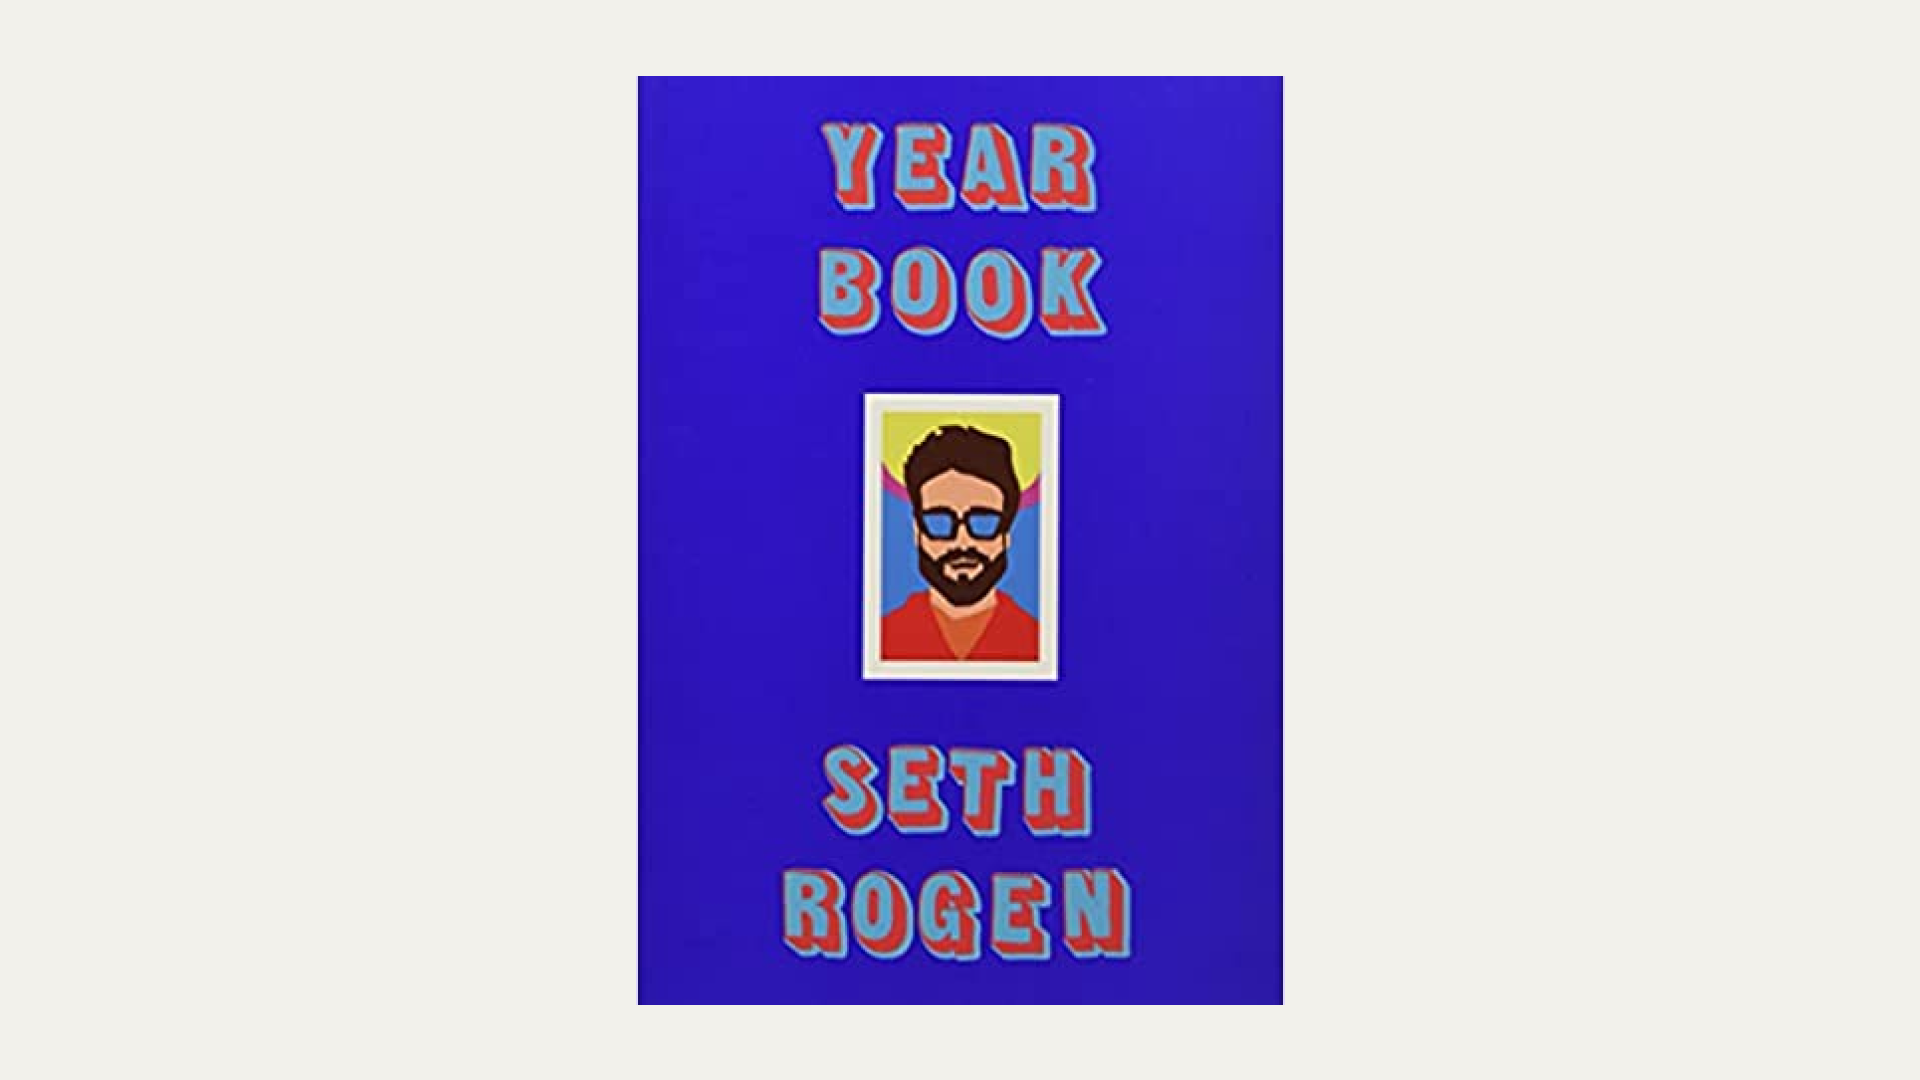 “Yearbook” by Seth Rogen